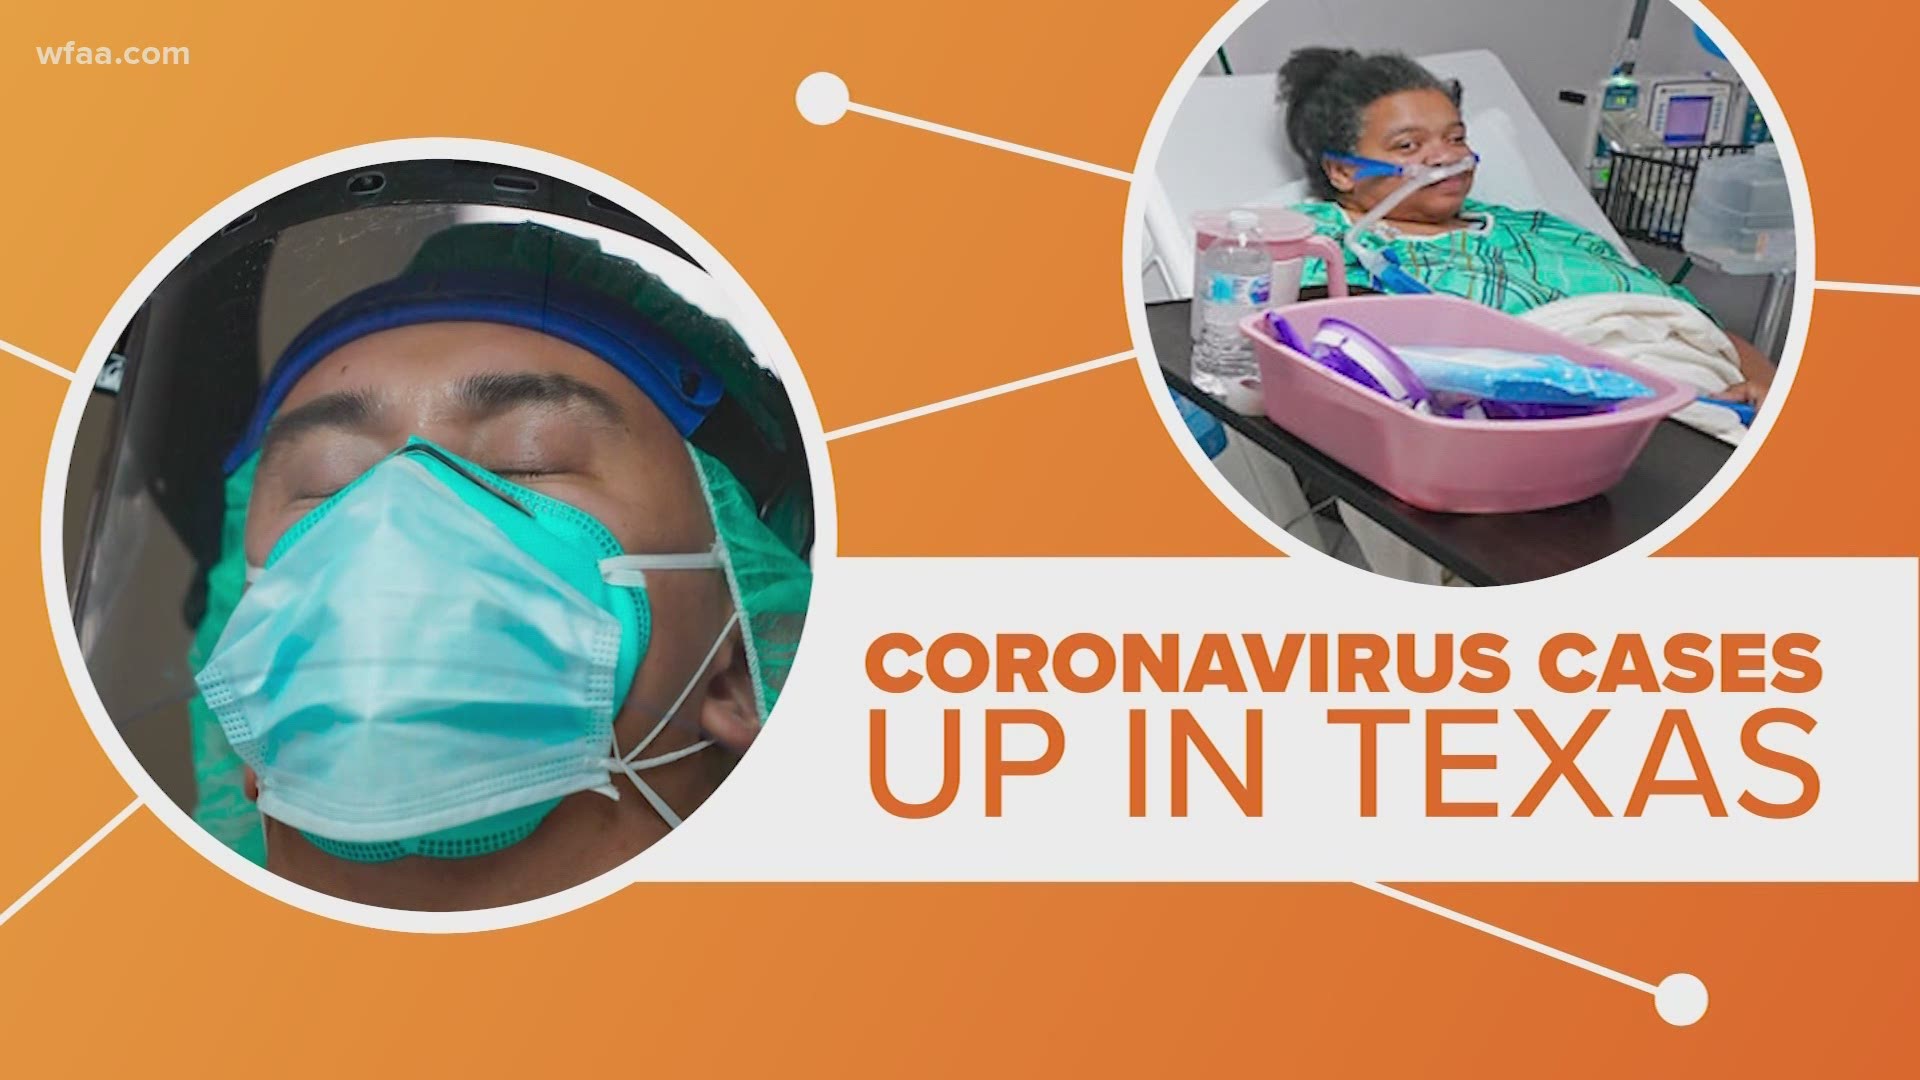 The surge in Texas coronavirus cases has raised COVID-19 hospitalizations by almost 2,500 cases since Oct. 1.